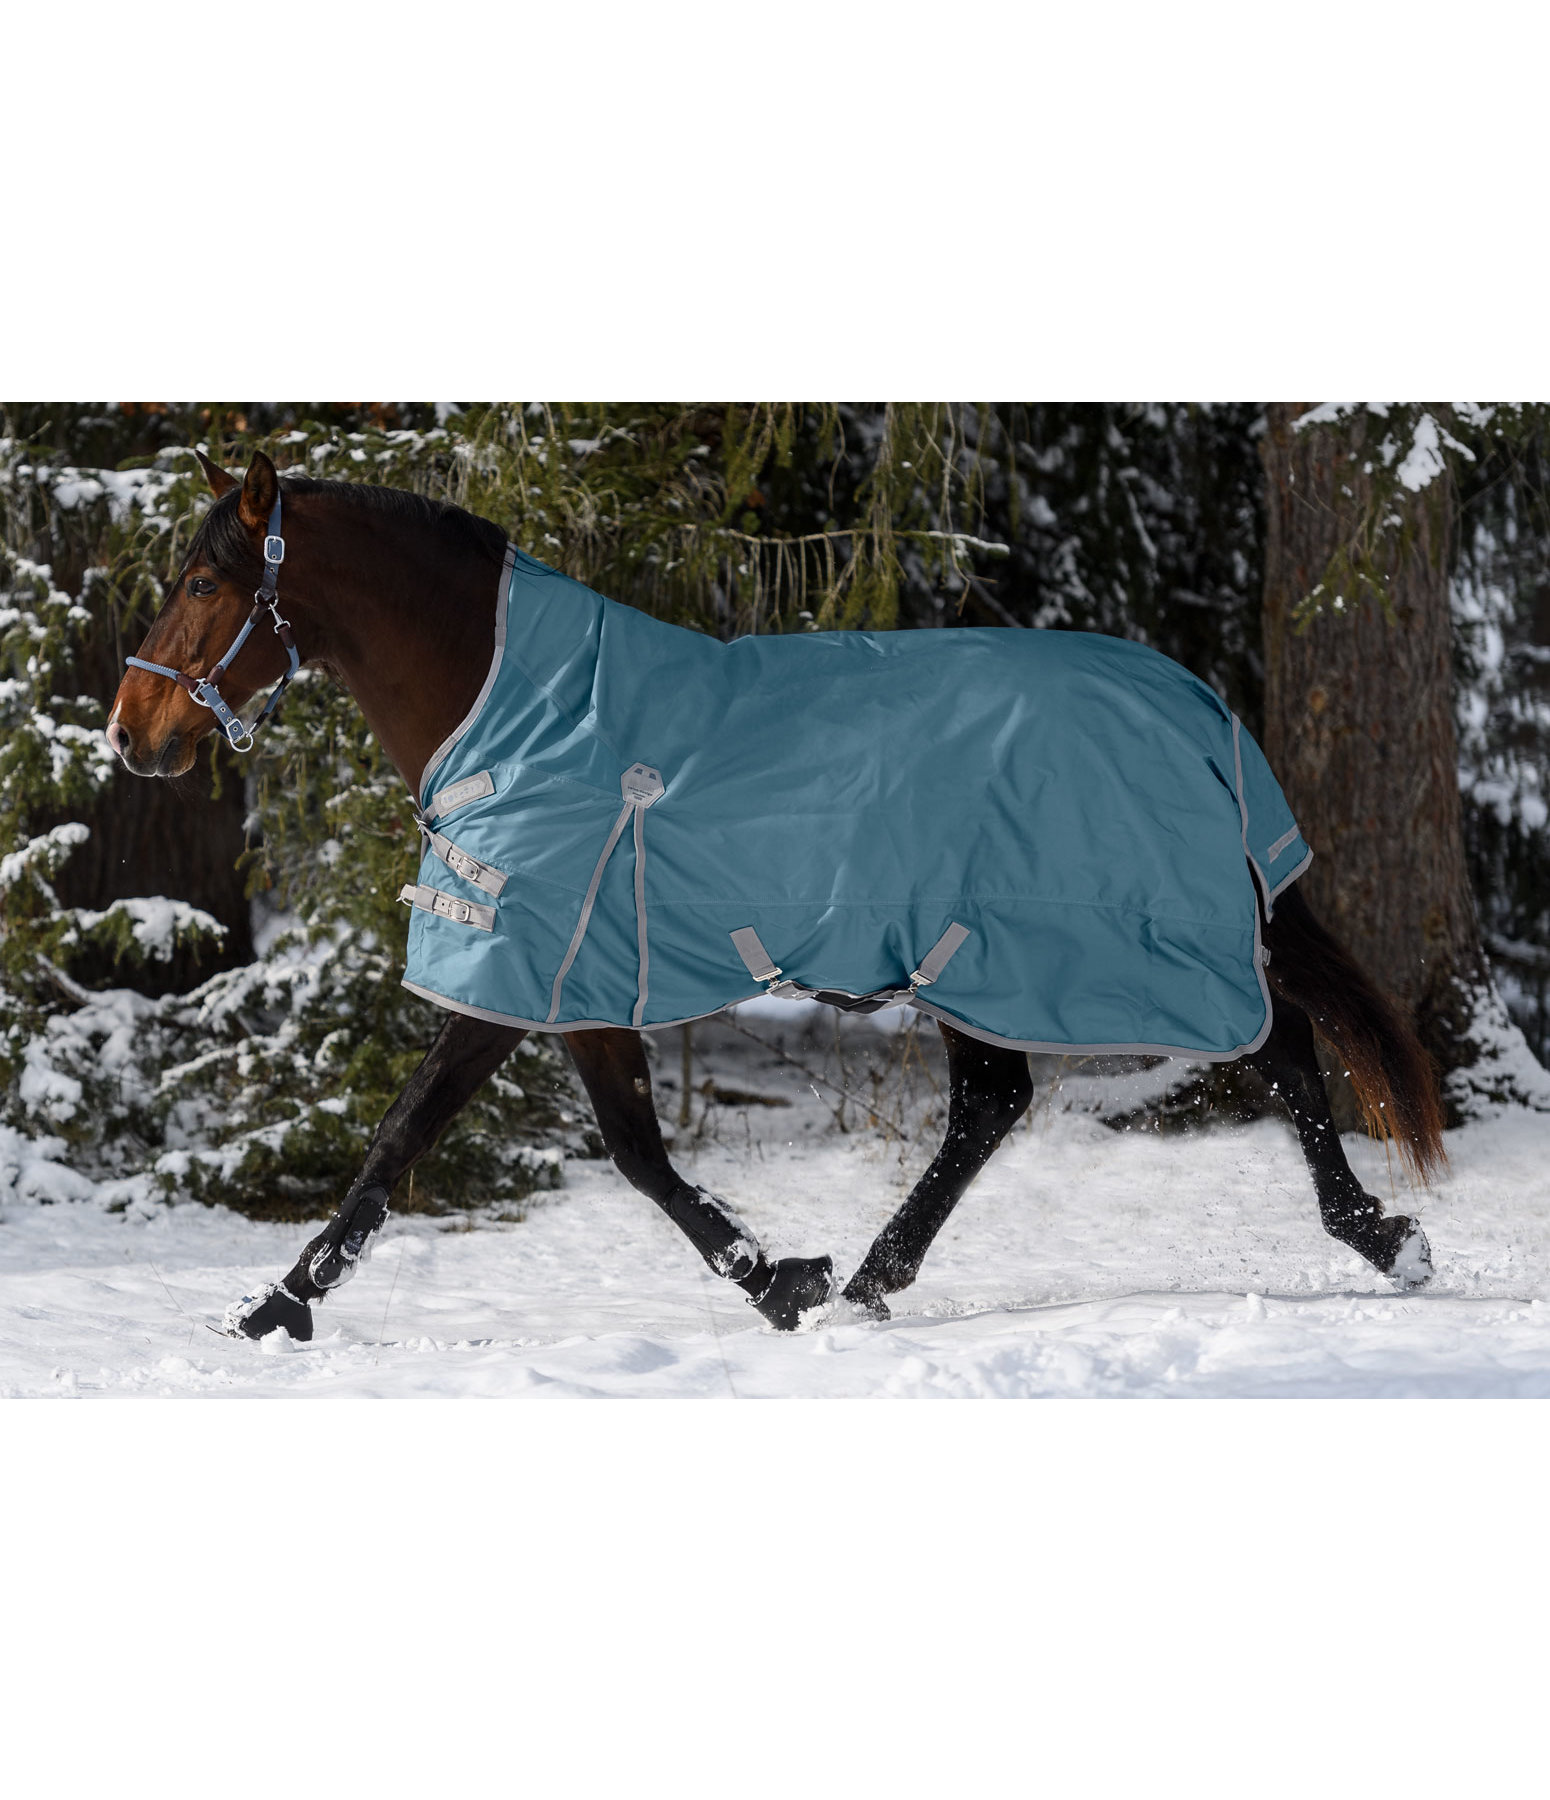 High Neck Turnout Rug Perfect Fit, 200g